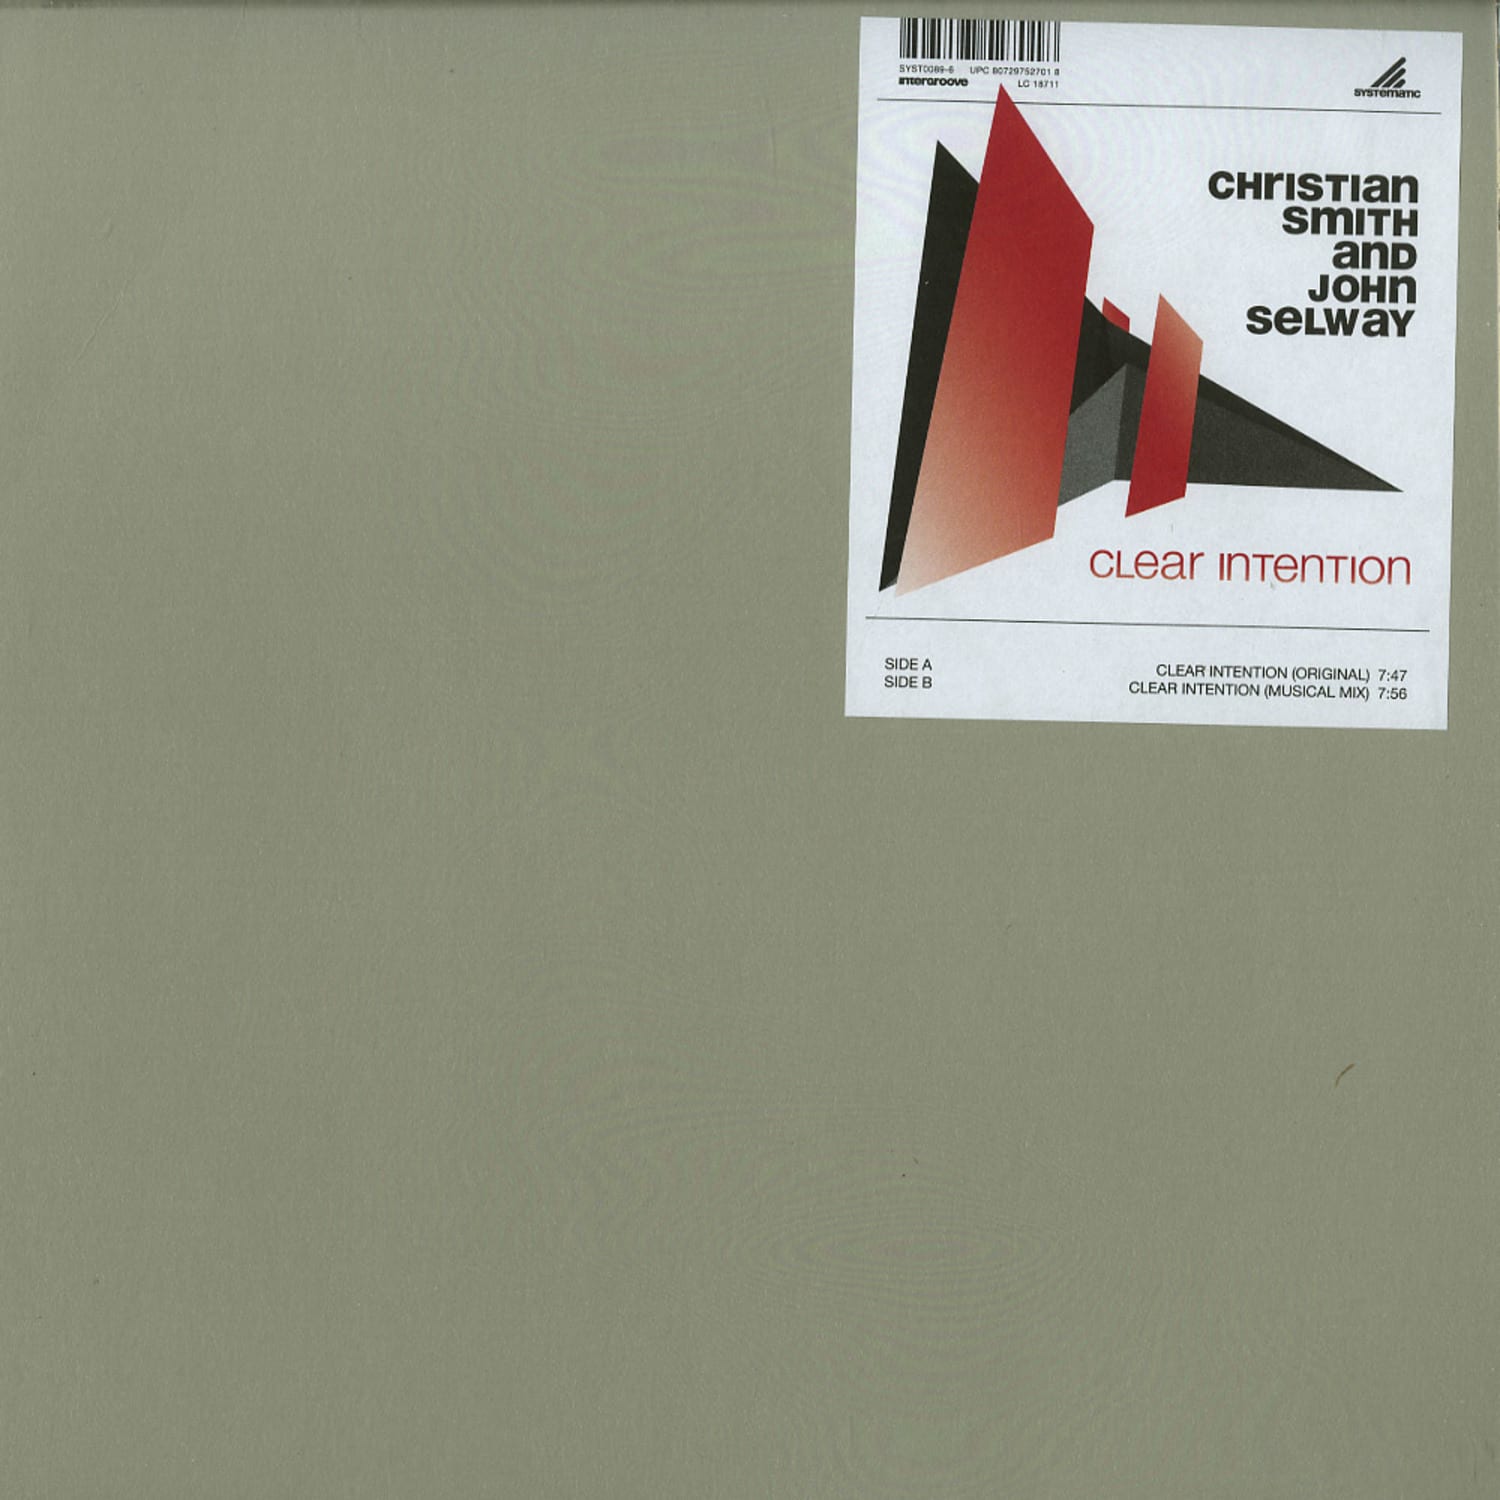 Christian Smith & John Selway - CLEAR INTENTION